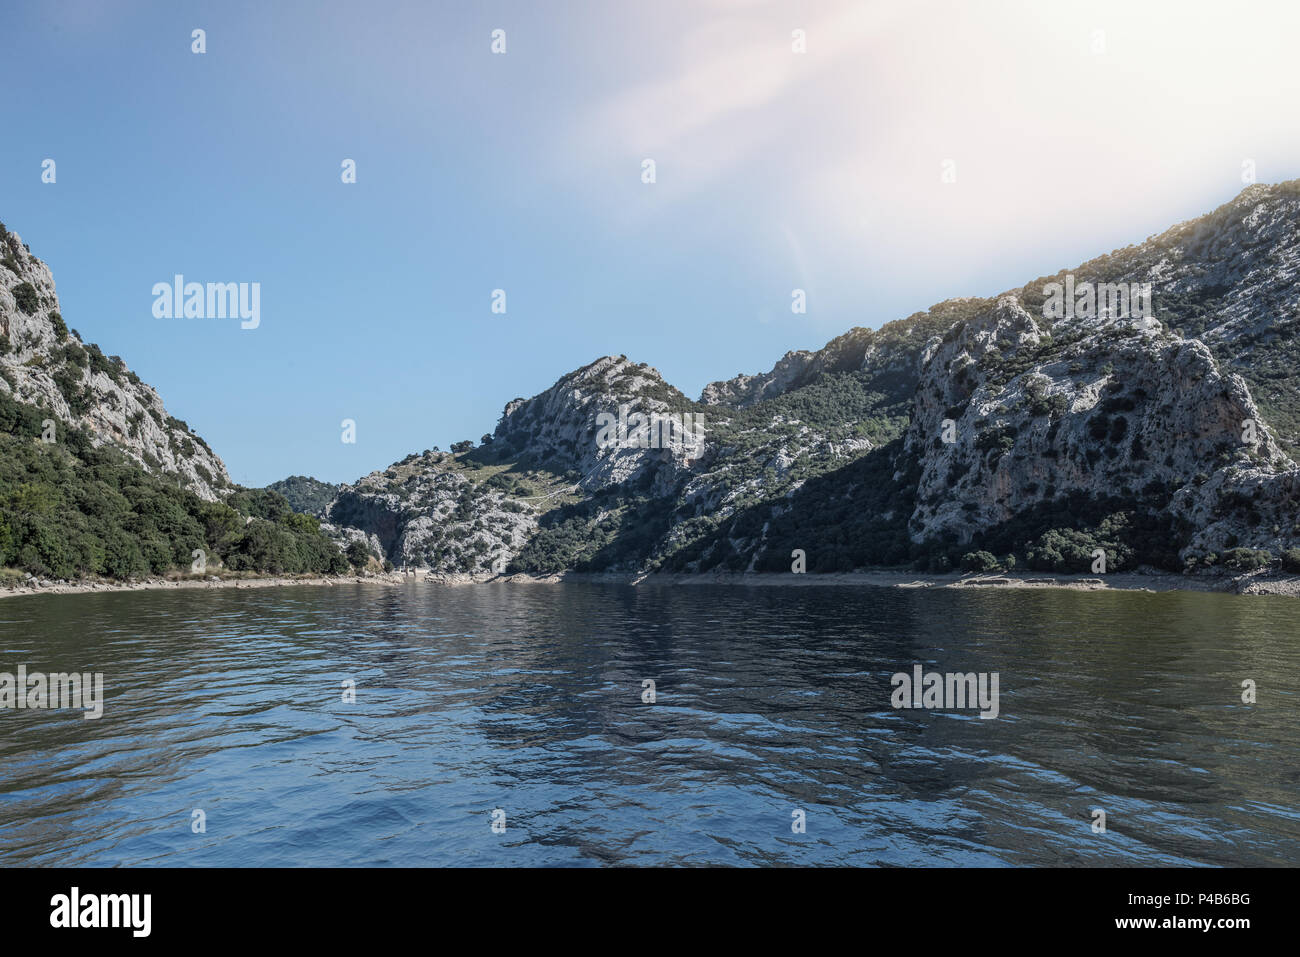 lake surrounded by mountains under blue sky Stock Photo